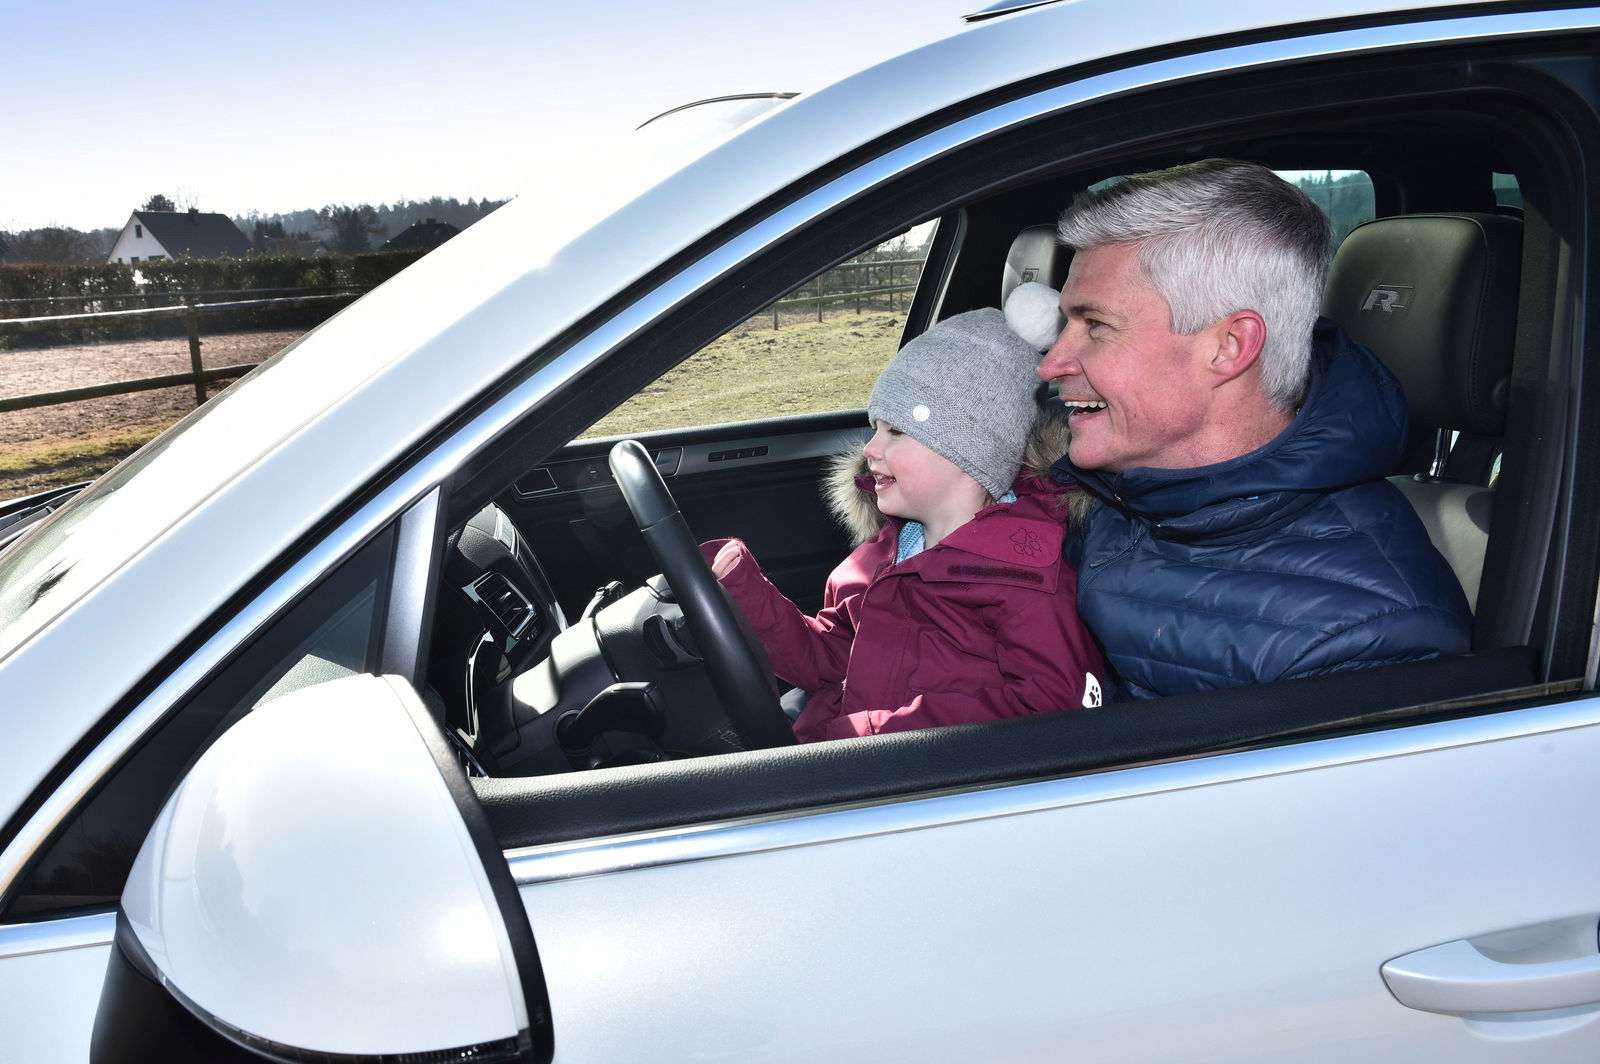 Story: A VW for all occasions – the Müller family and their Touareg